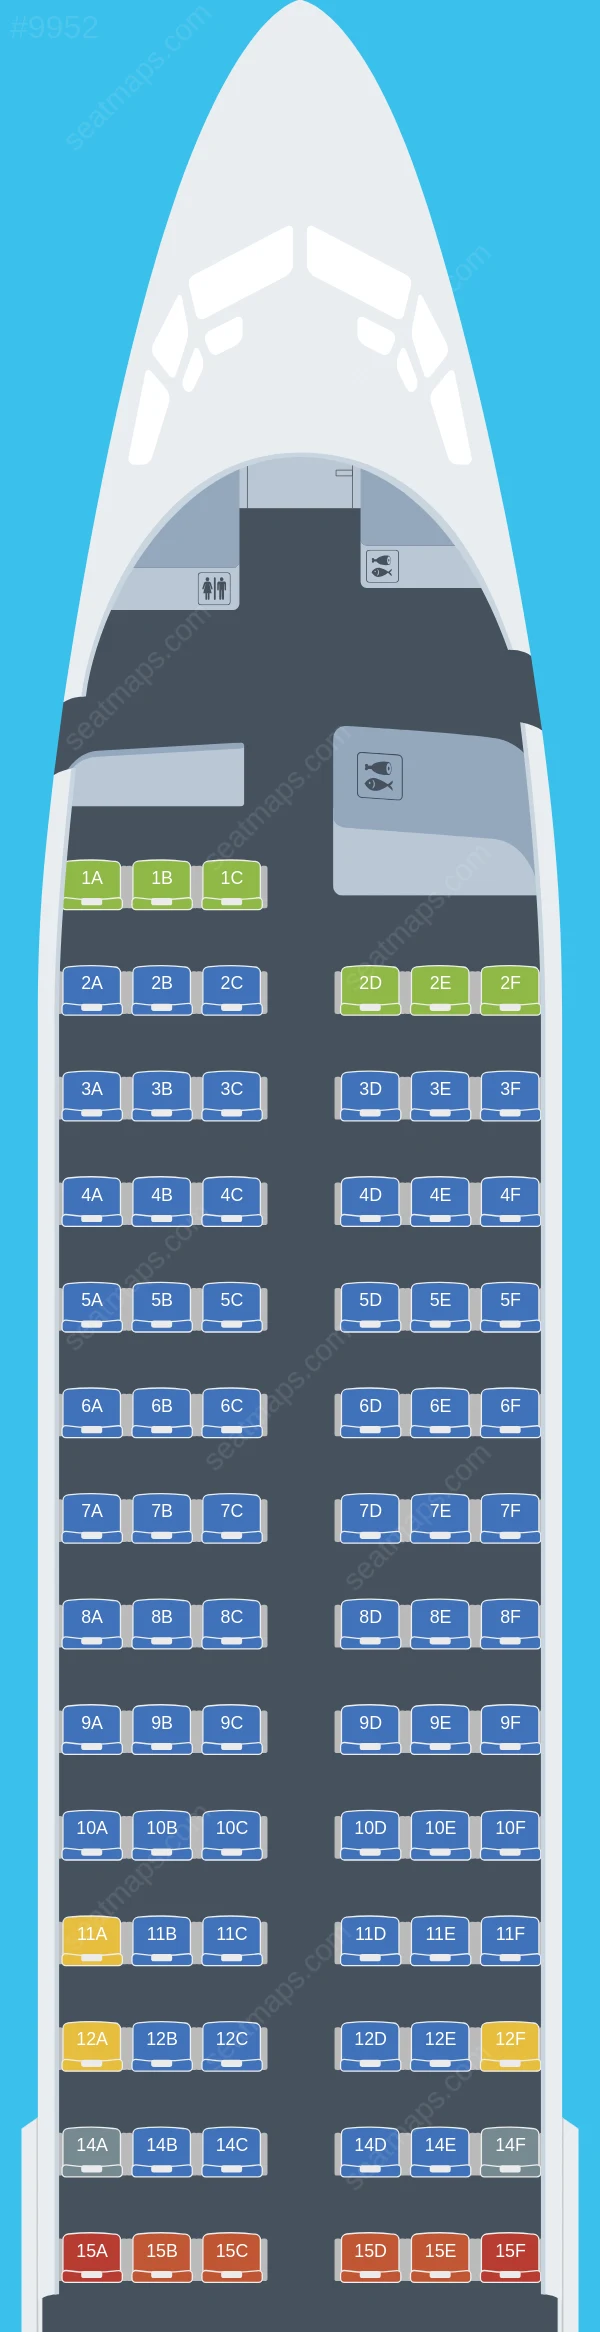 Firefly Boeing 737-800 seatmap preview